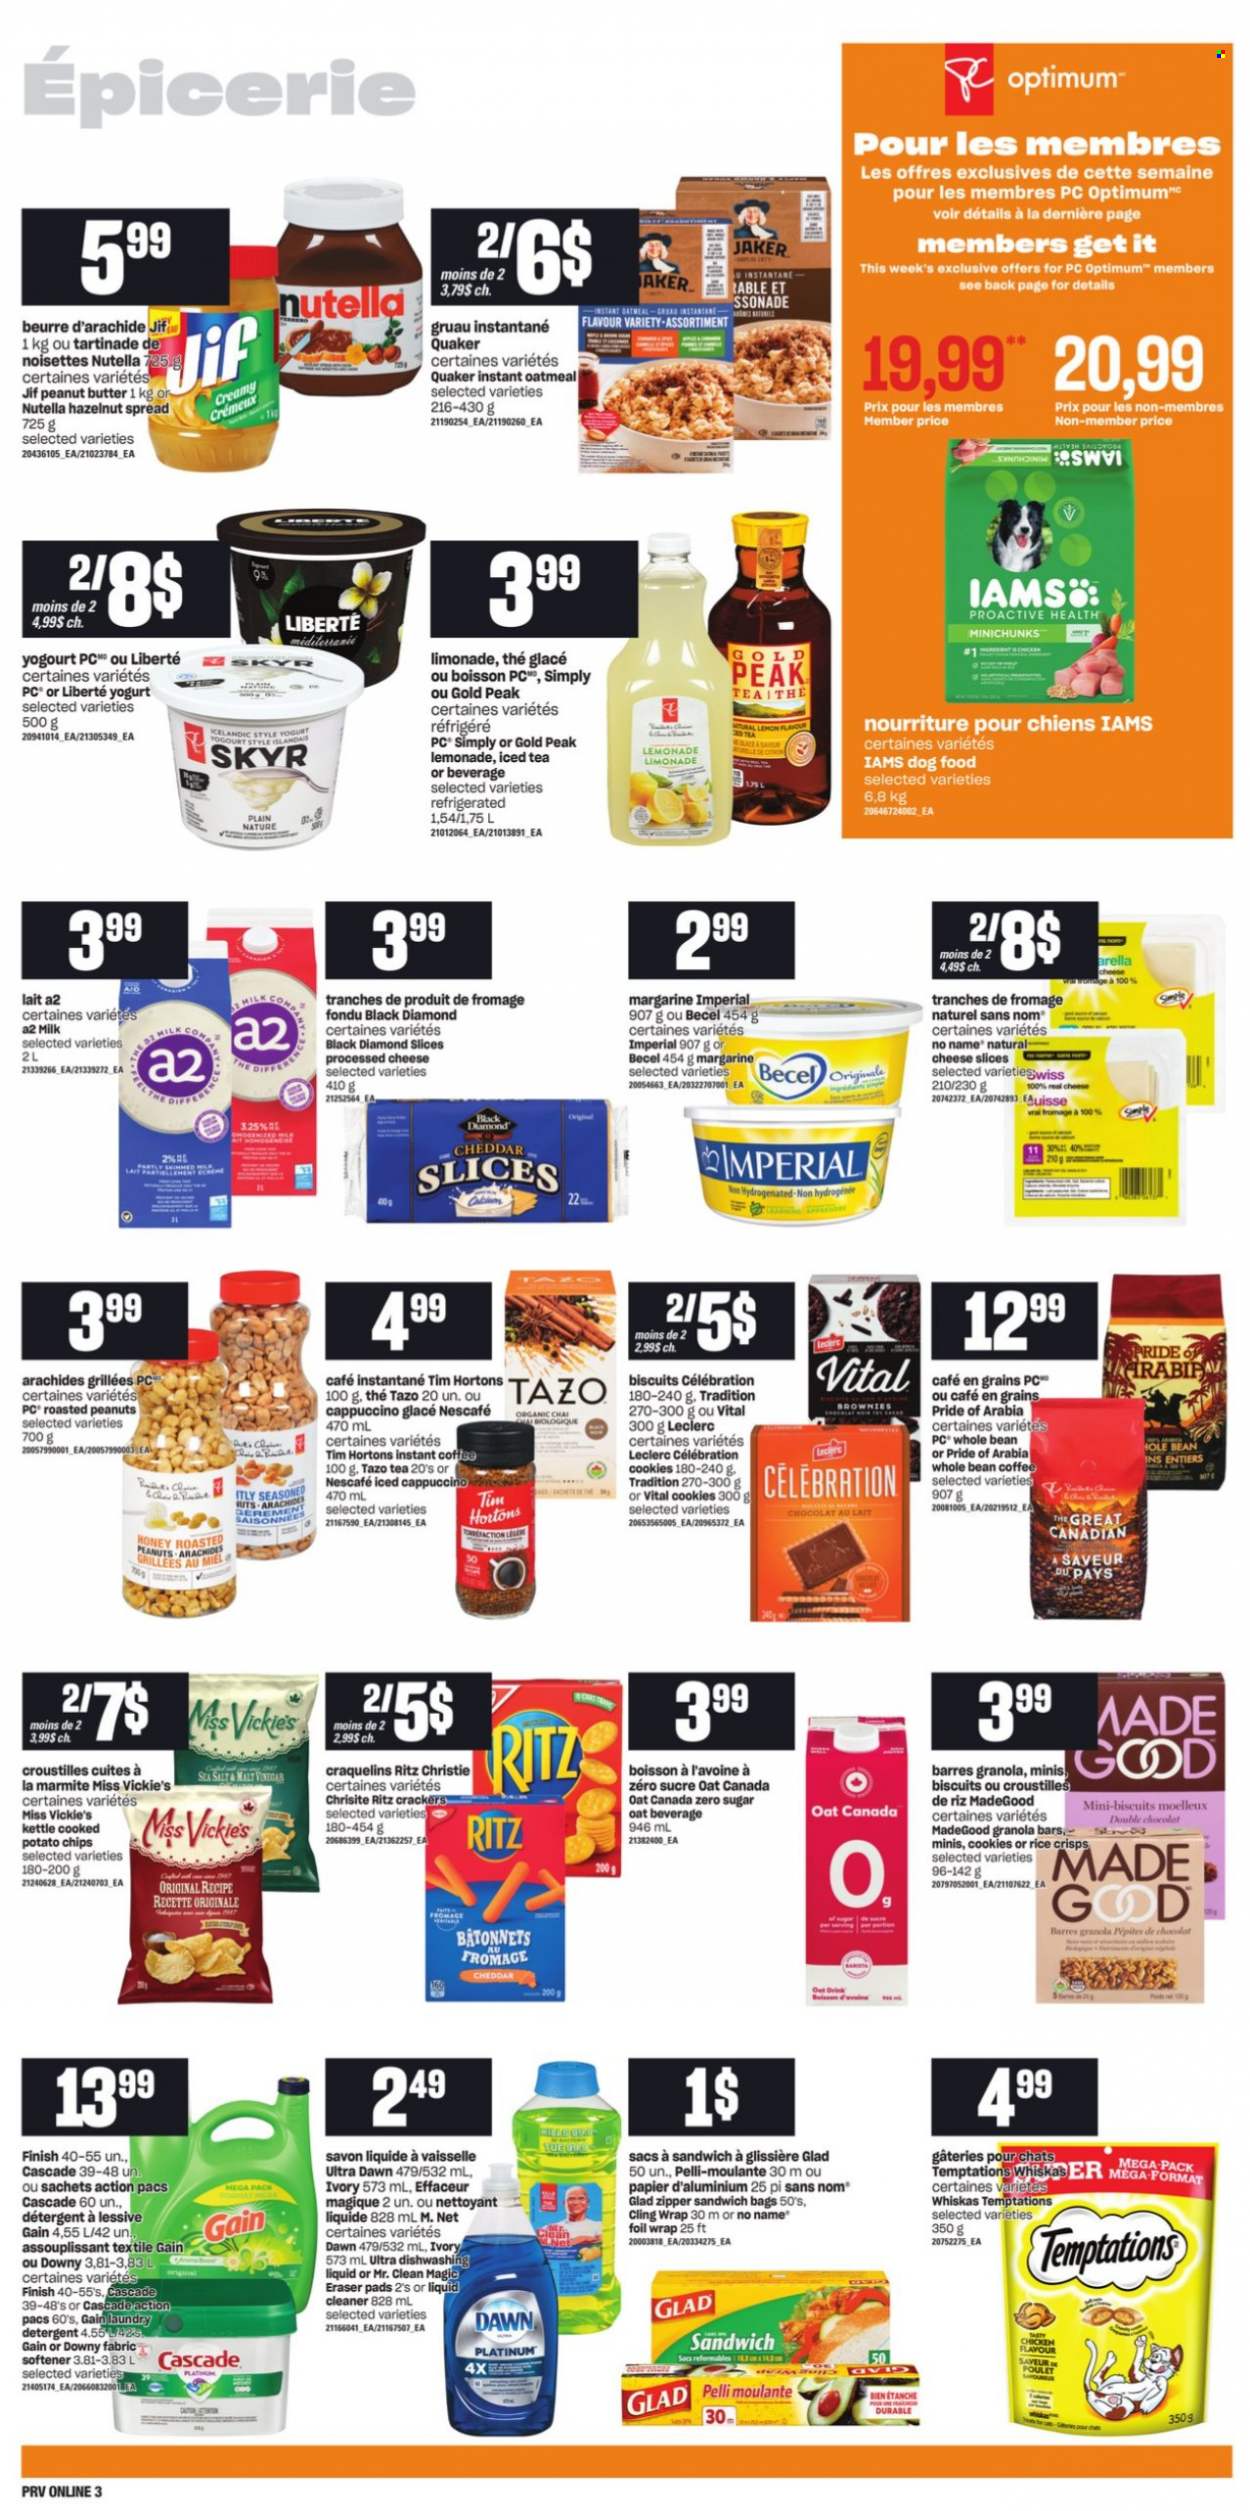 thumbnail - Provigo Flyer - October 21, 2021 - October 27, 2021 - Sales products - brownies, No Name, Quaker, sliced cheese, cheese, yoghurt, milk, margarine, cookies, Celebration, crackers, biscuit, RITZ, potato chips, rice crisps, oatmeal, oats, malt, granola bar, rice, honey, peanut butter, hazelnut spread, Jif, roasted peanuts, peanuts, lemonade, ice tea, cappuccino, instant coffee, Gain, cleaner, liquid cleaner, fabric softener, laundry detergent, Cascade, Downy Laundry, dishwashing liquid, bag, detergent, Nutella, chips, Whiskas, Nescafé. Page 7.